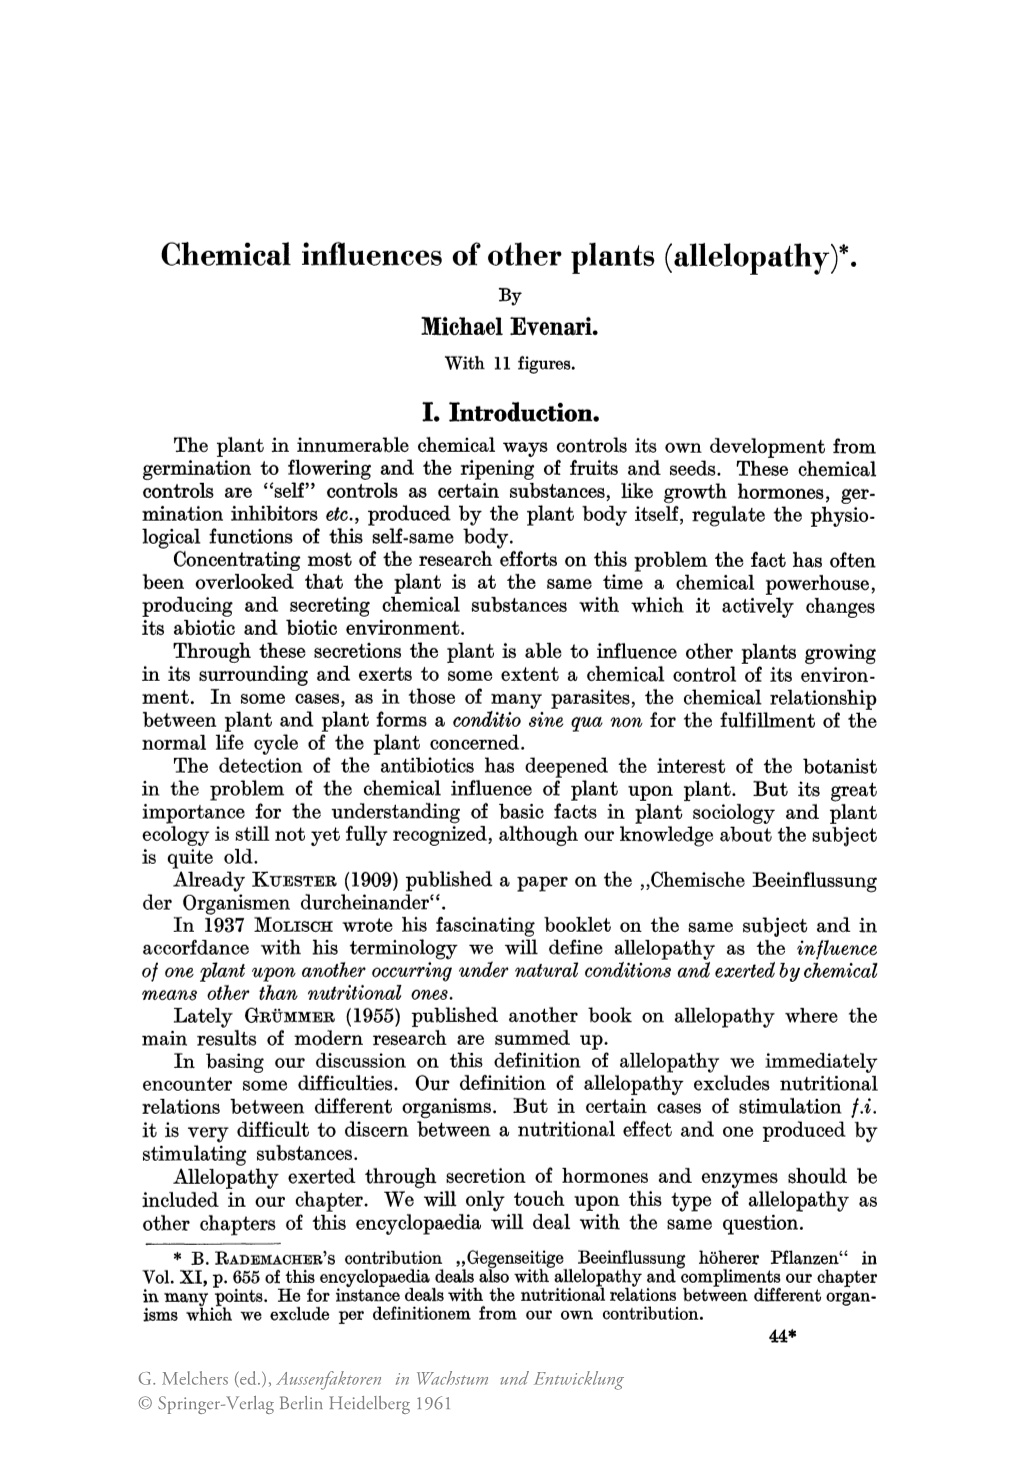 Chemical Influences of Other Plants (Allelopathy)*. by Michael Evenari